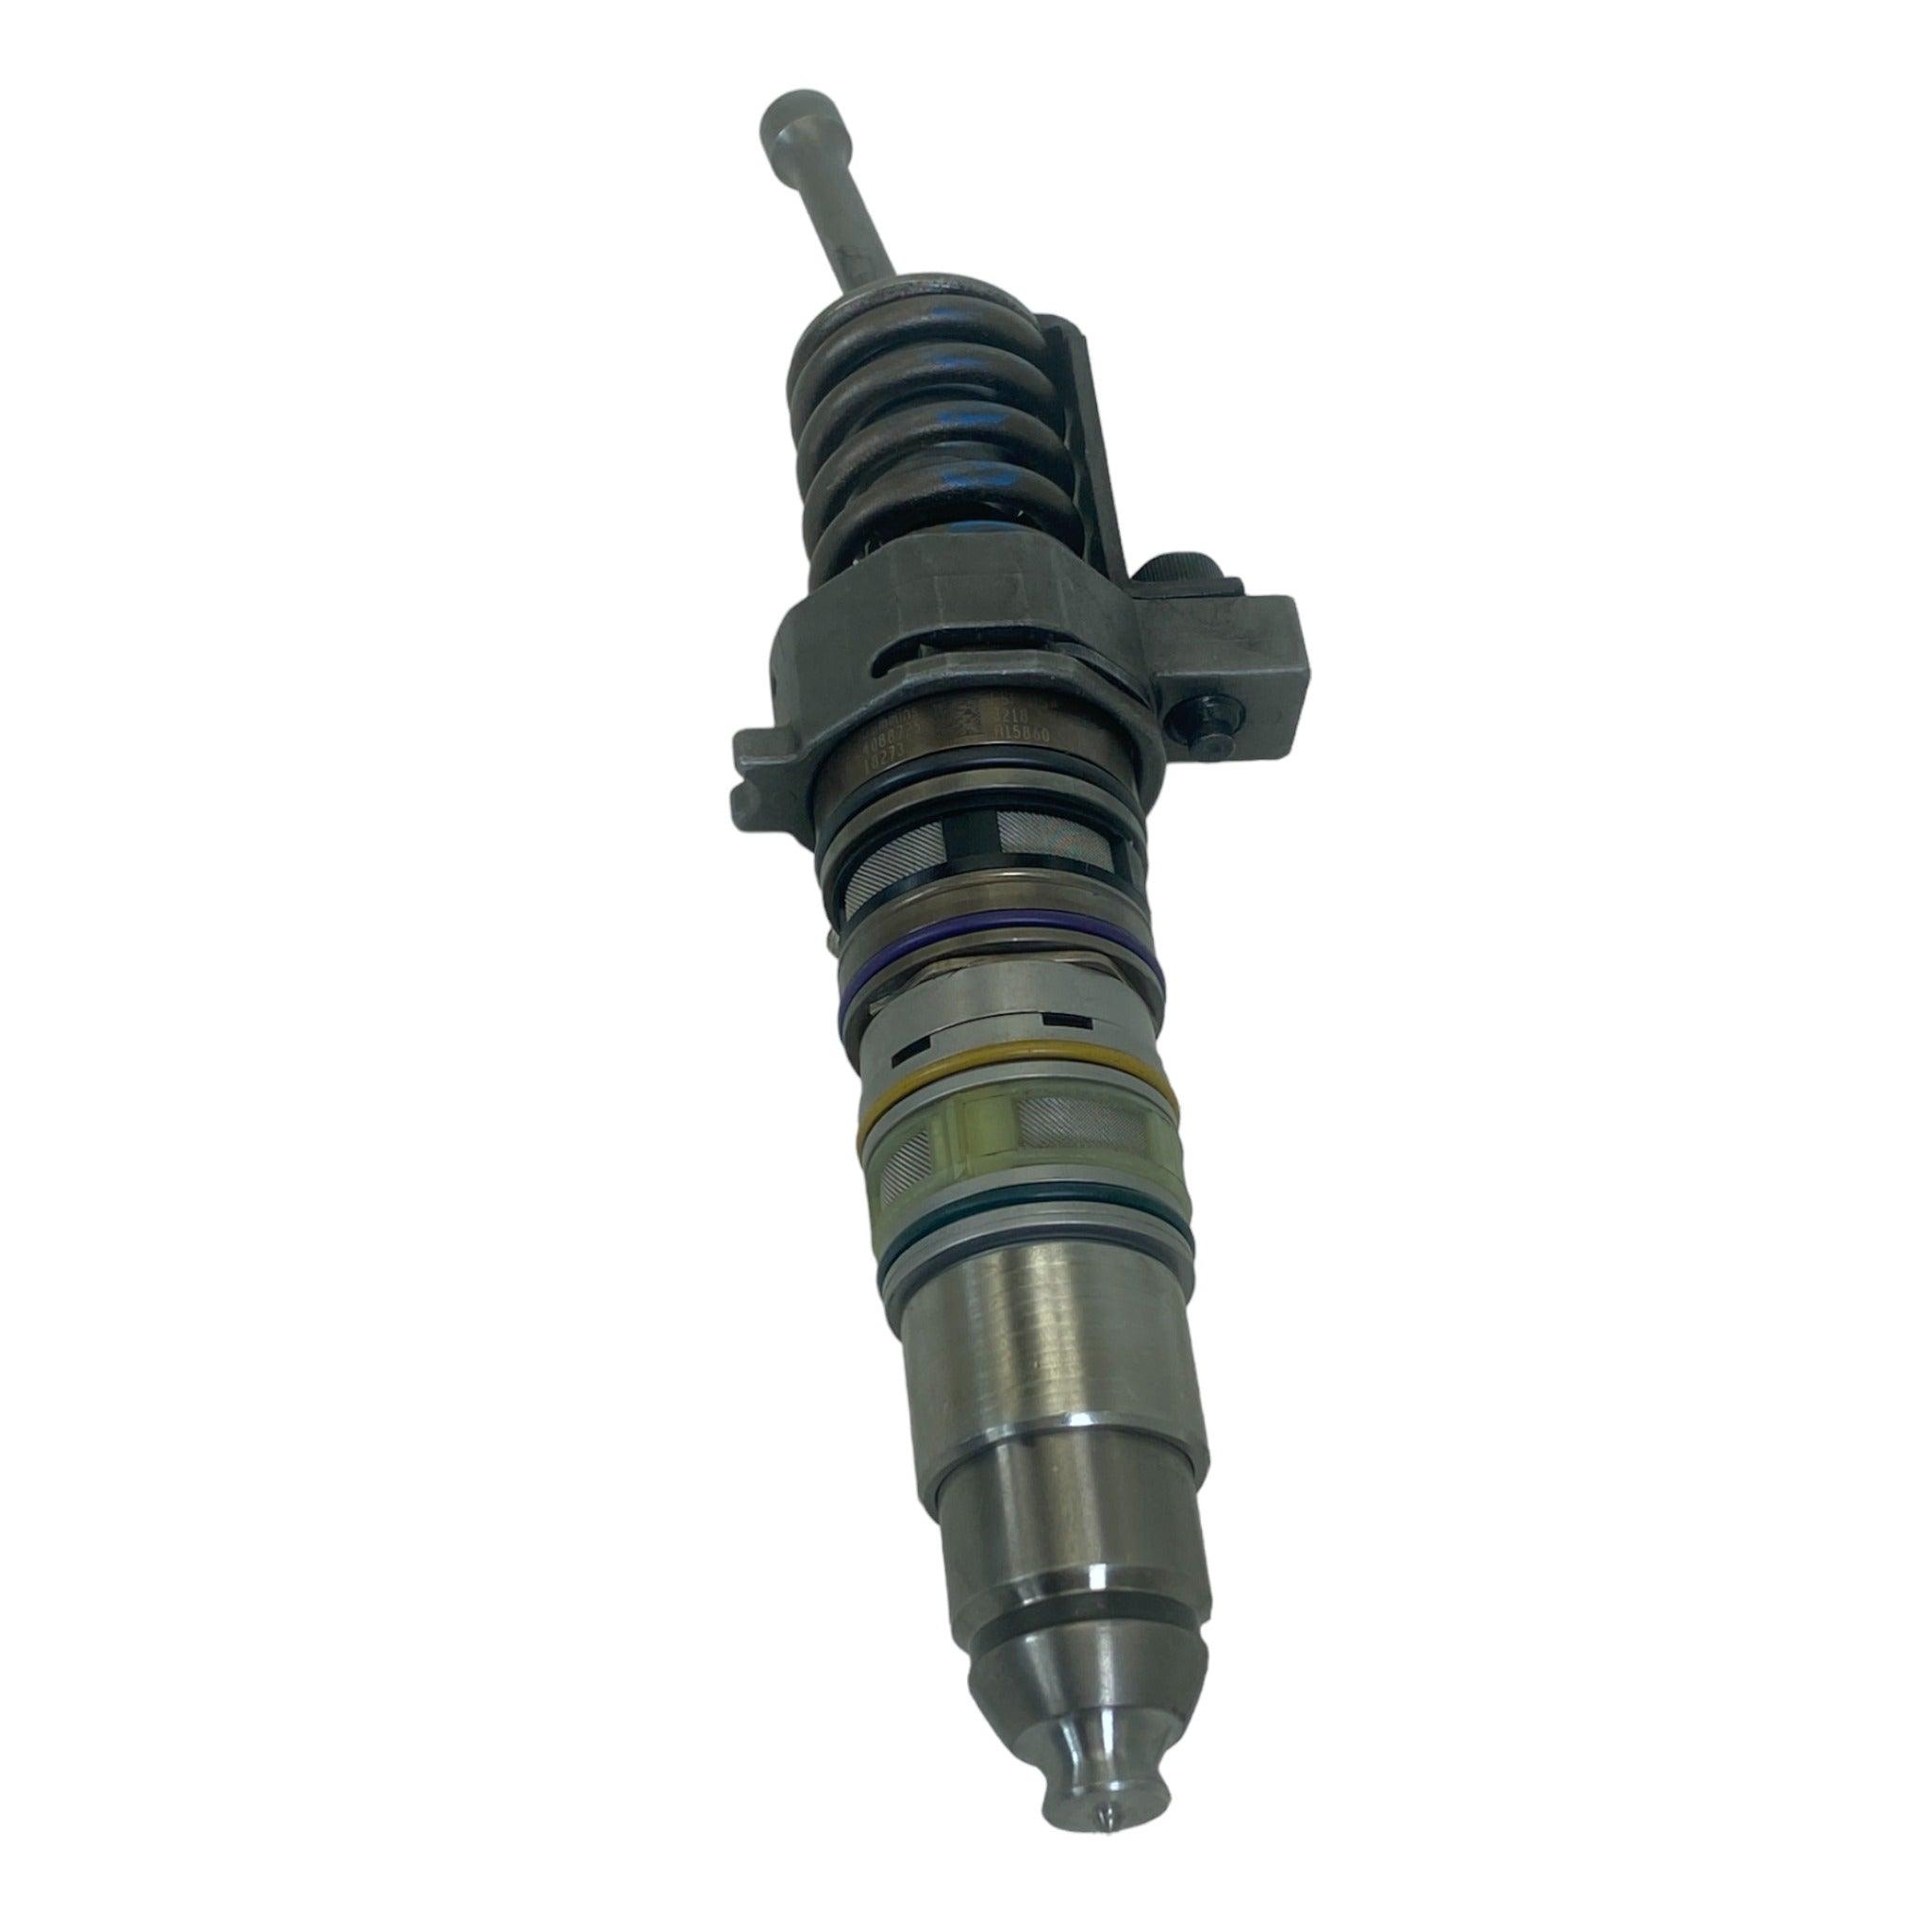 4088665PX Genuine Cummins Fuel Injector For ISX - ADVANCED TRUCK PARTS